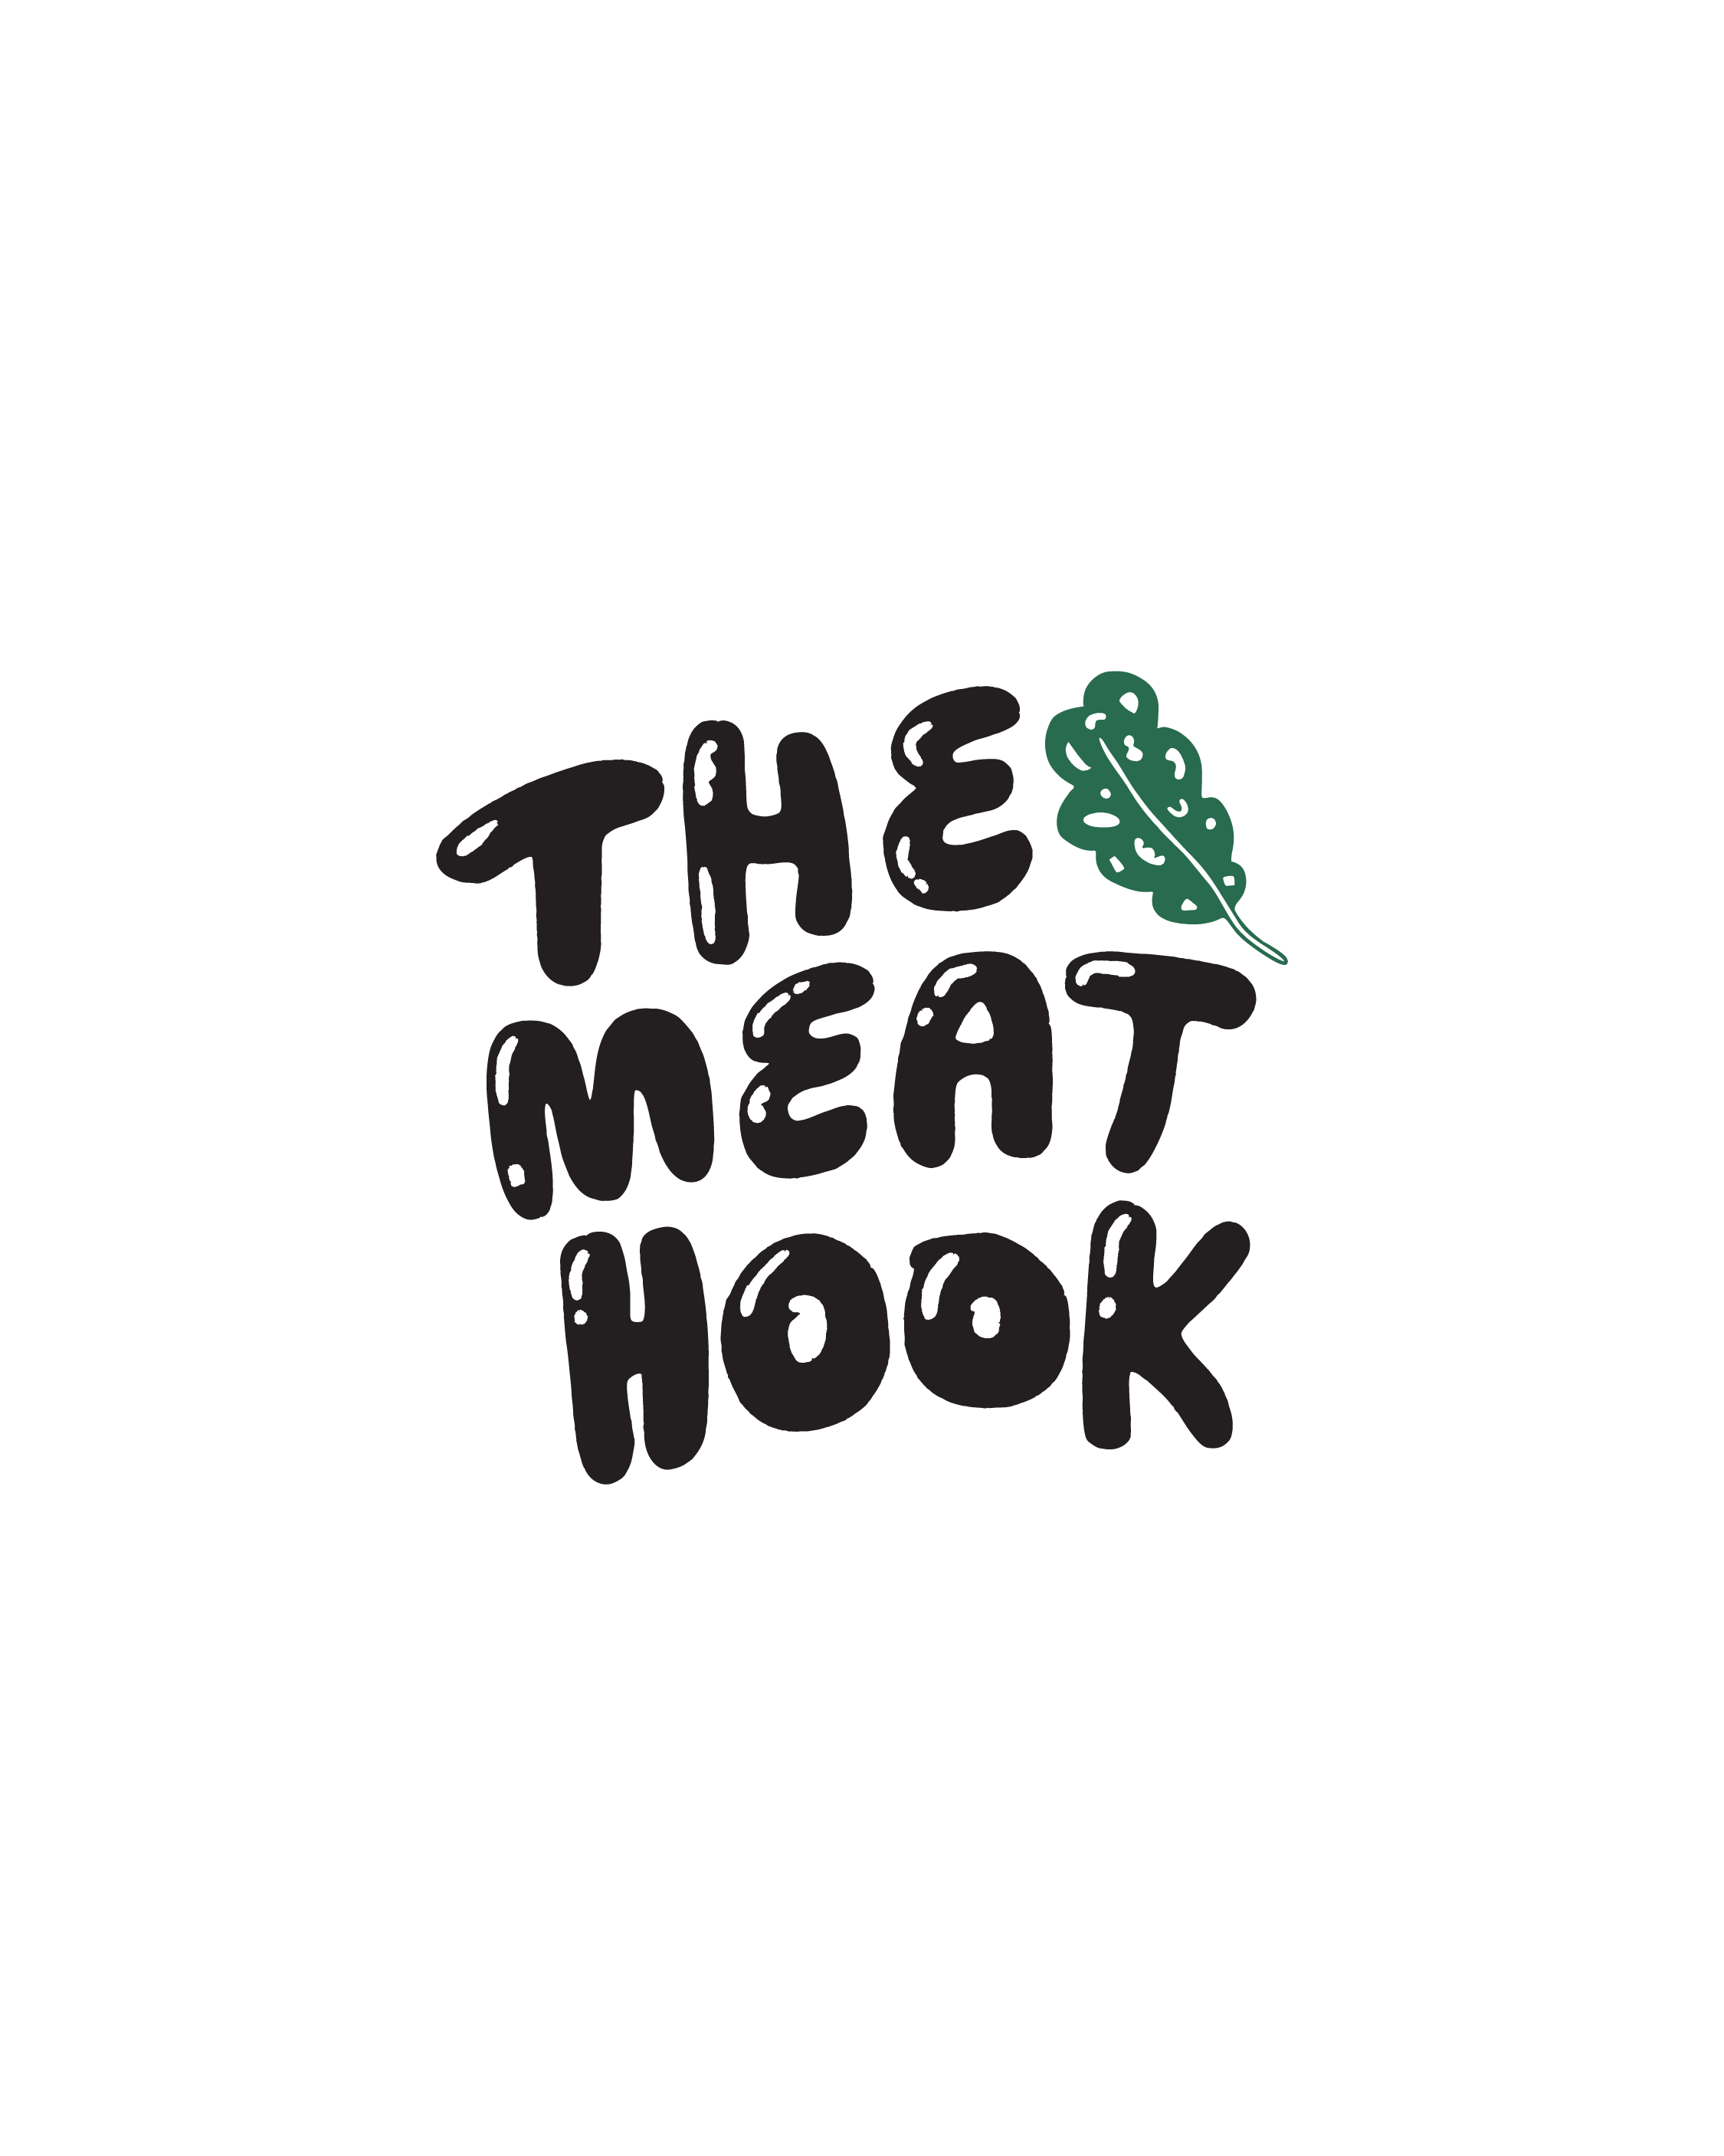 The Meat Hook